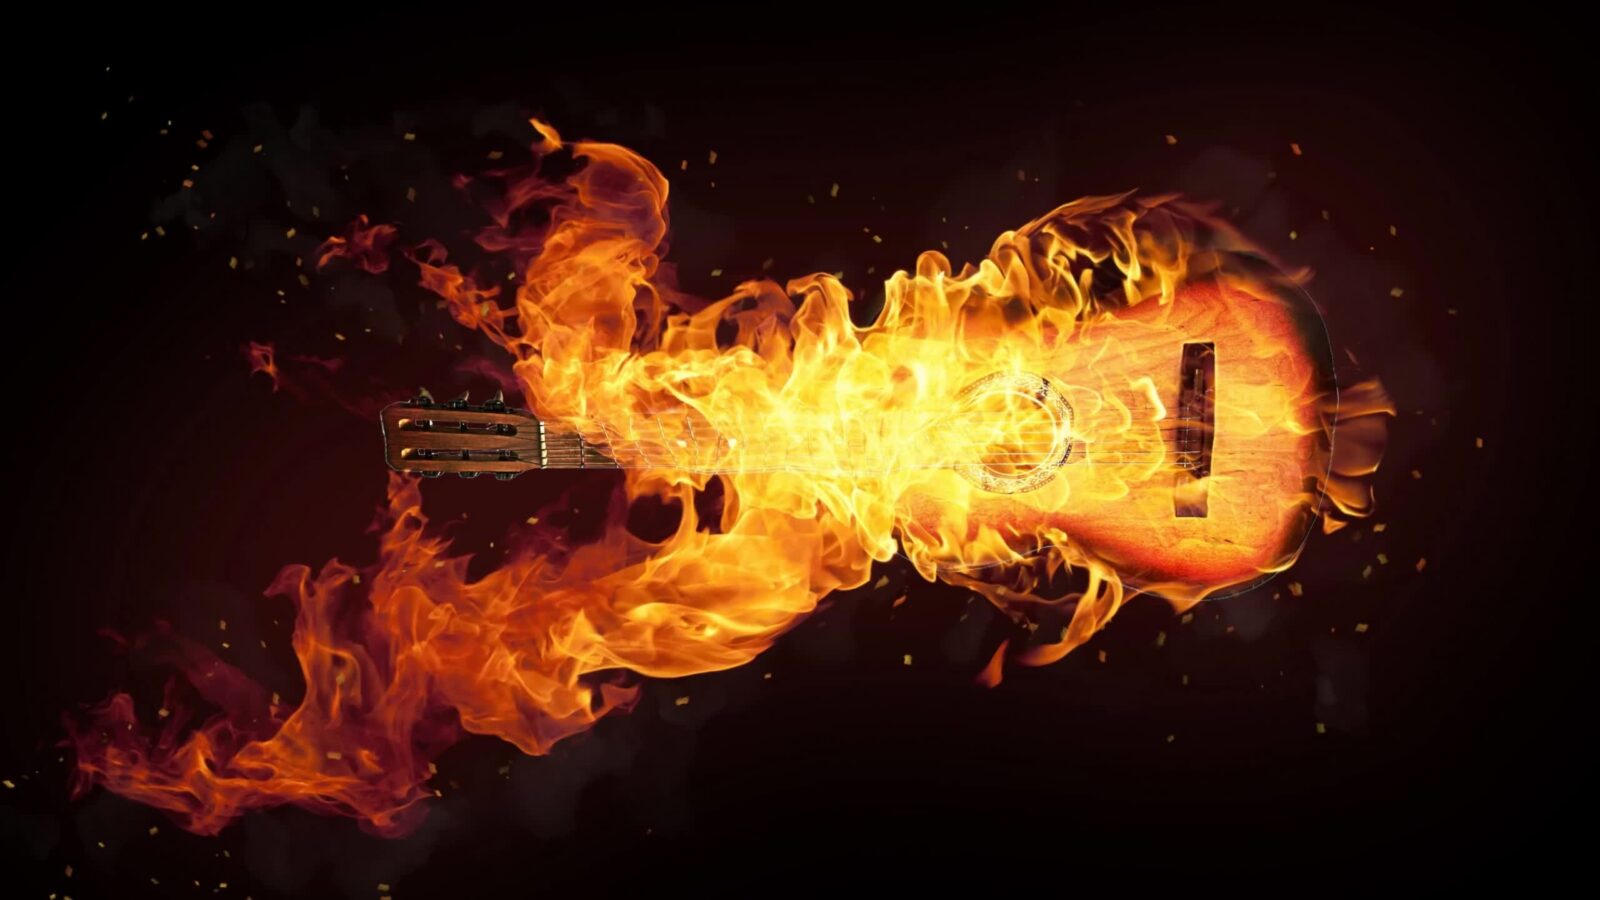 LiveWallpapers4Free.com | Flame Guitar Fantasy Abstract 2K Quality - Animated Live Wallpaper